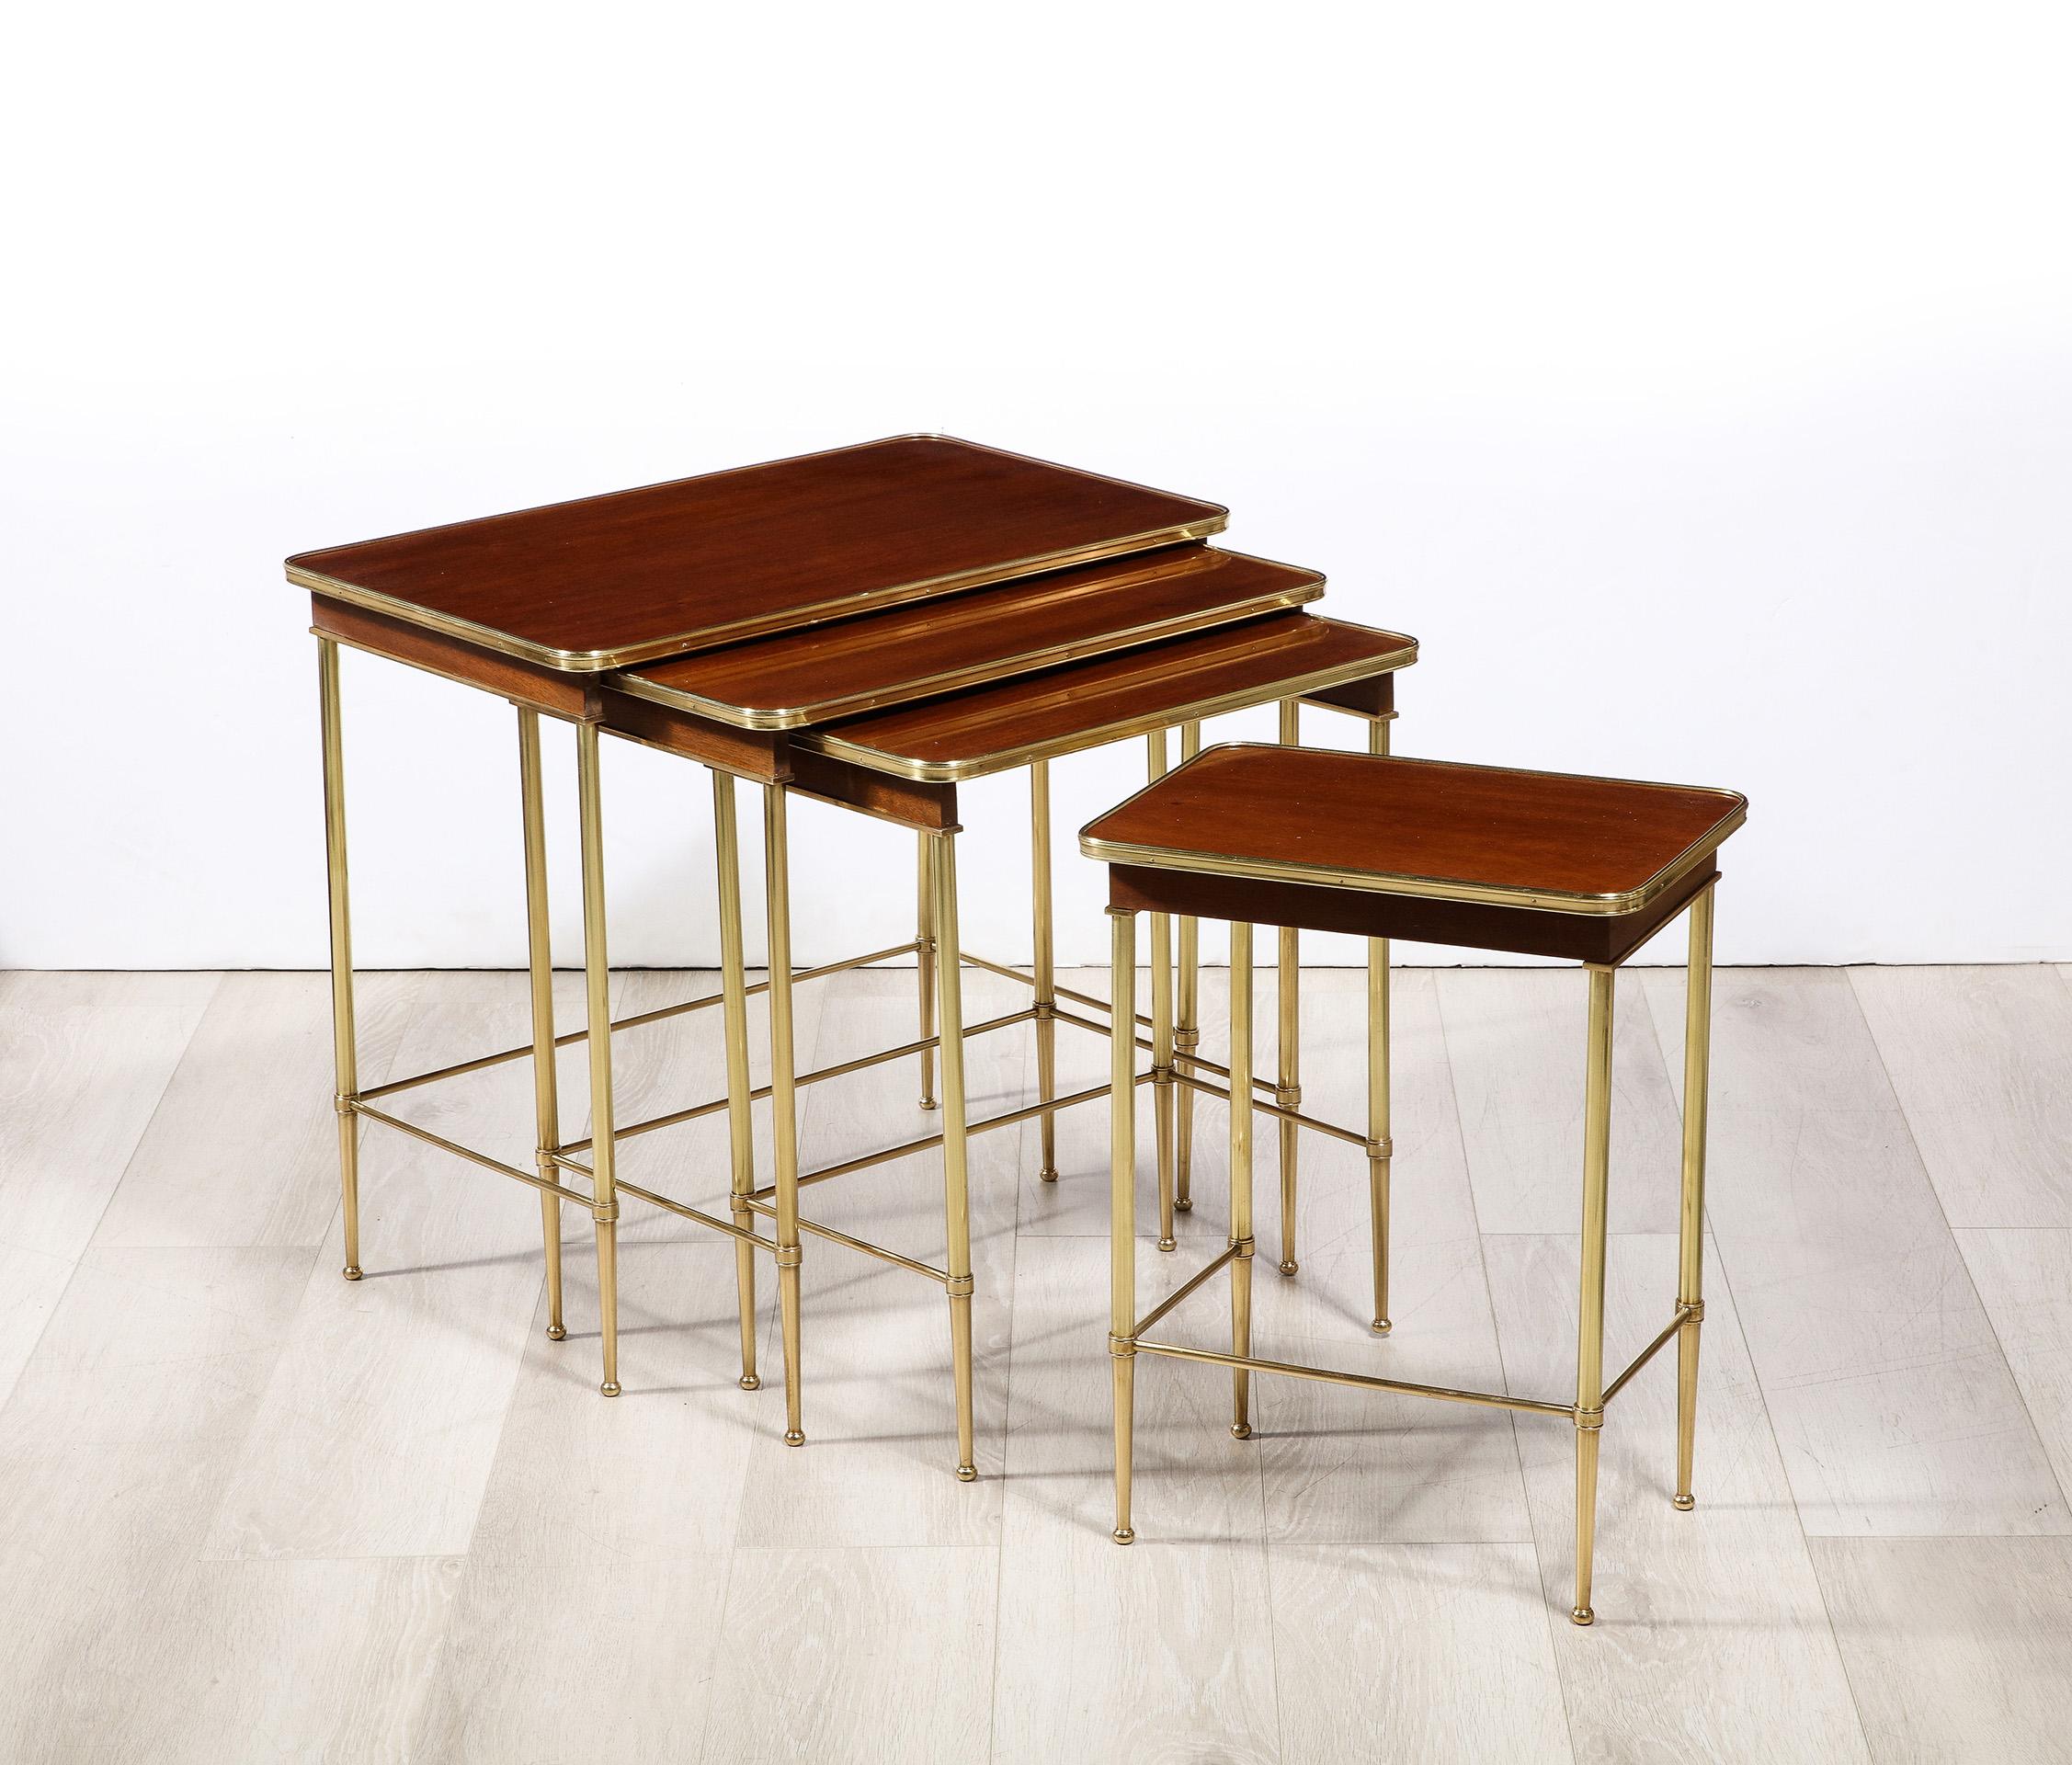 Set of 4 Mahogany and Brass Nesting Tables by Maison Jansen For Sale 2